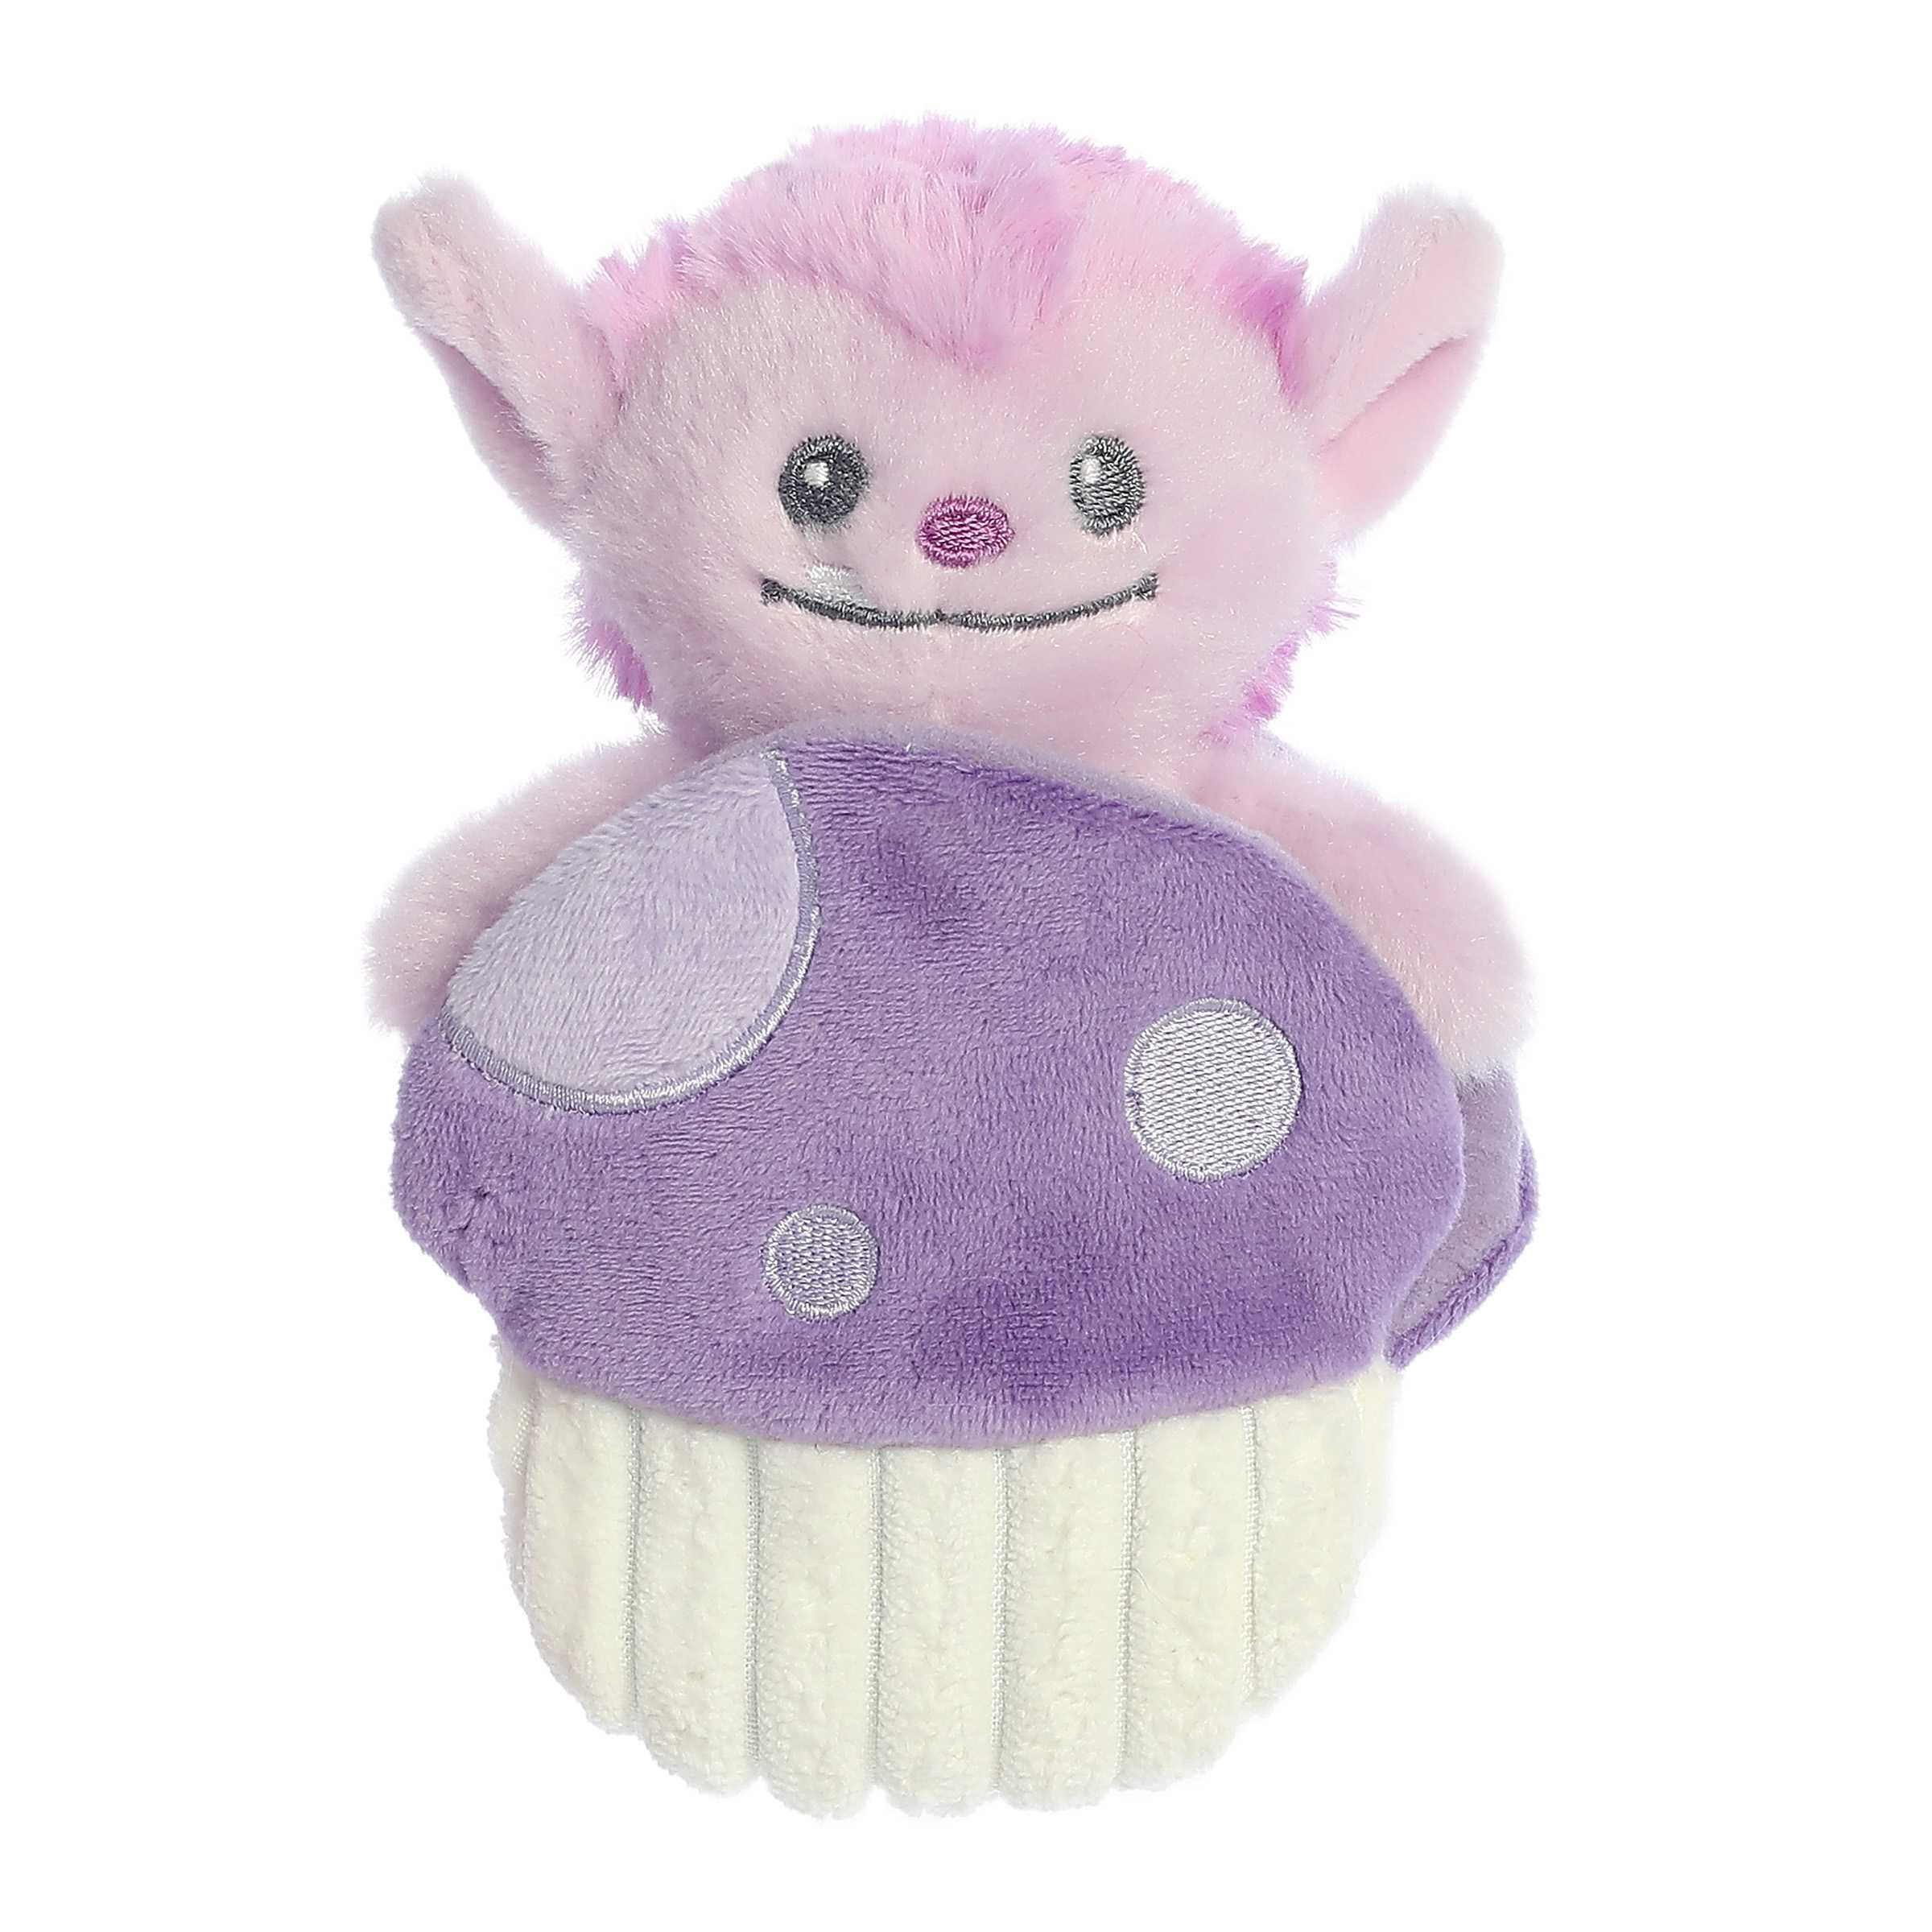 Interactive mini purple Ogre plush rattle toy with smiling face sitting inside a crinkly purple mushroom pocket